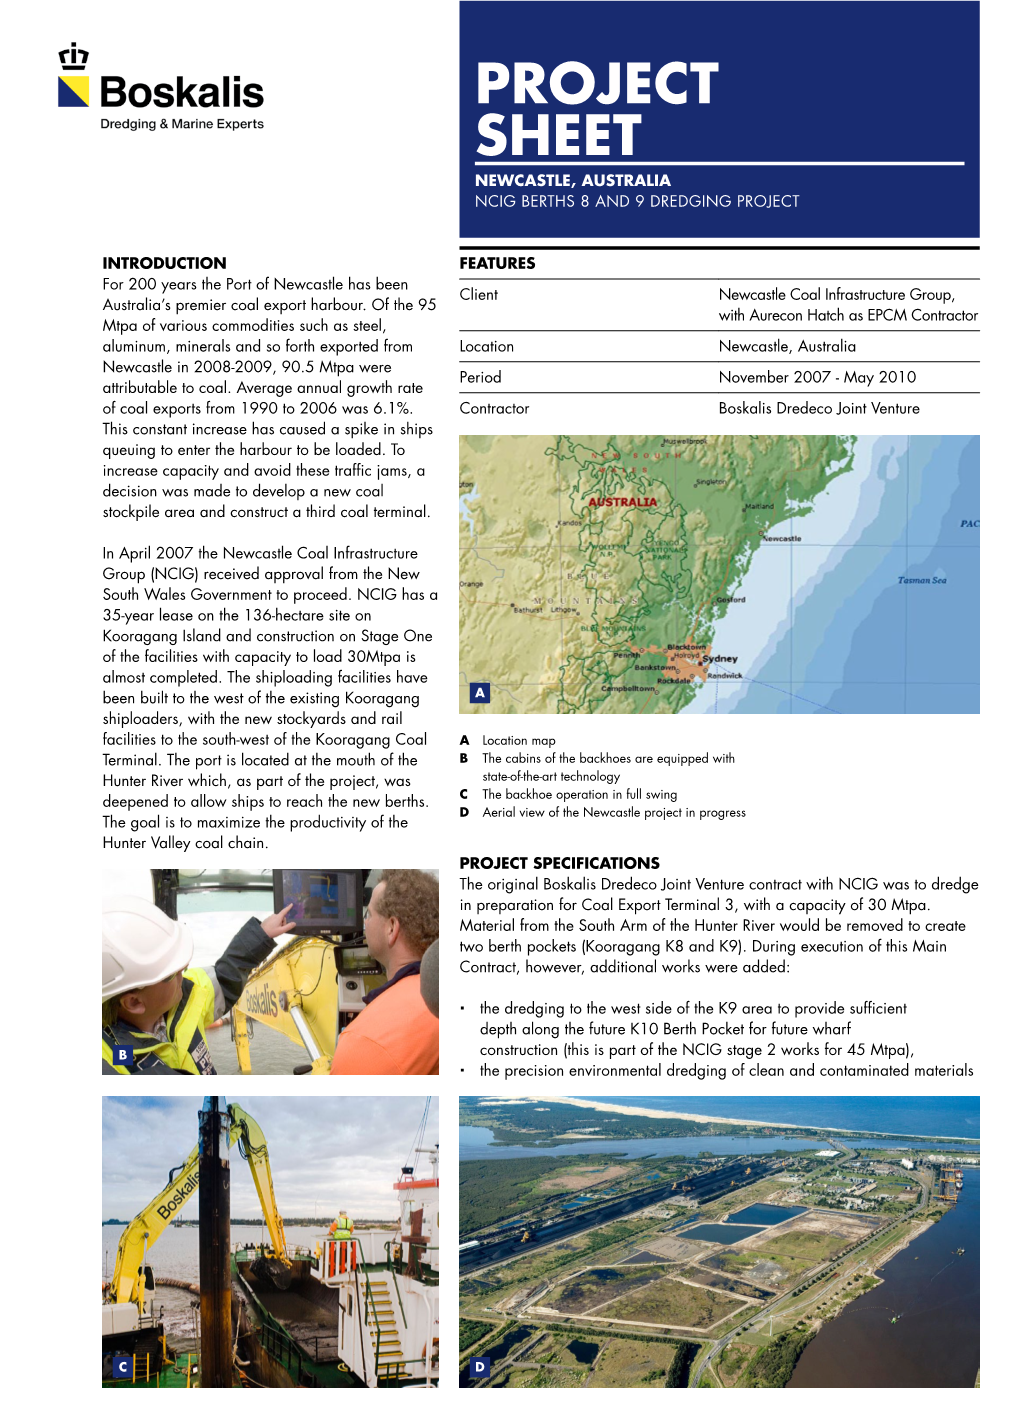 Project SHEET Newcastle, Australia NCIG Berths 8 and 9 Dredging Project